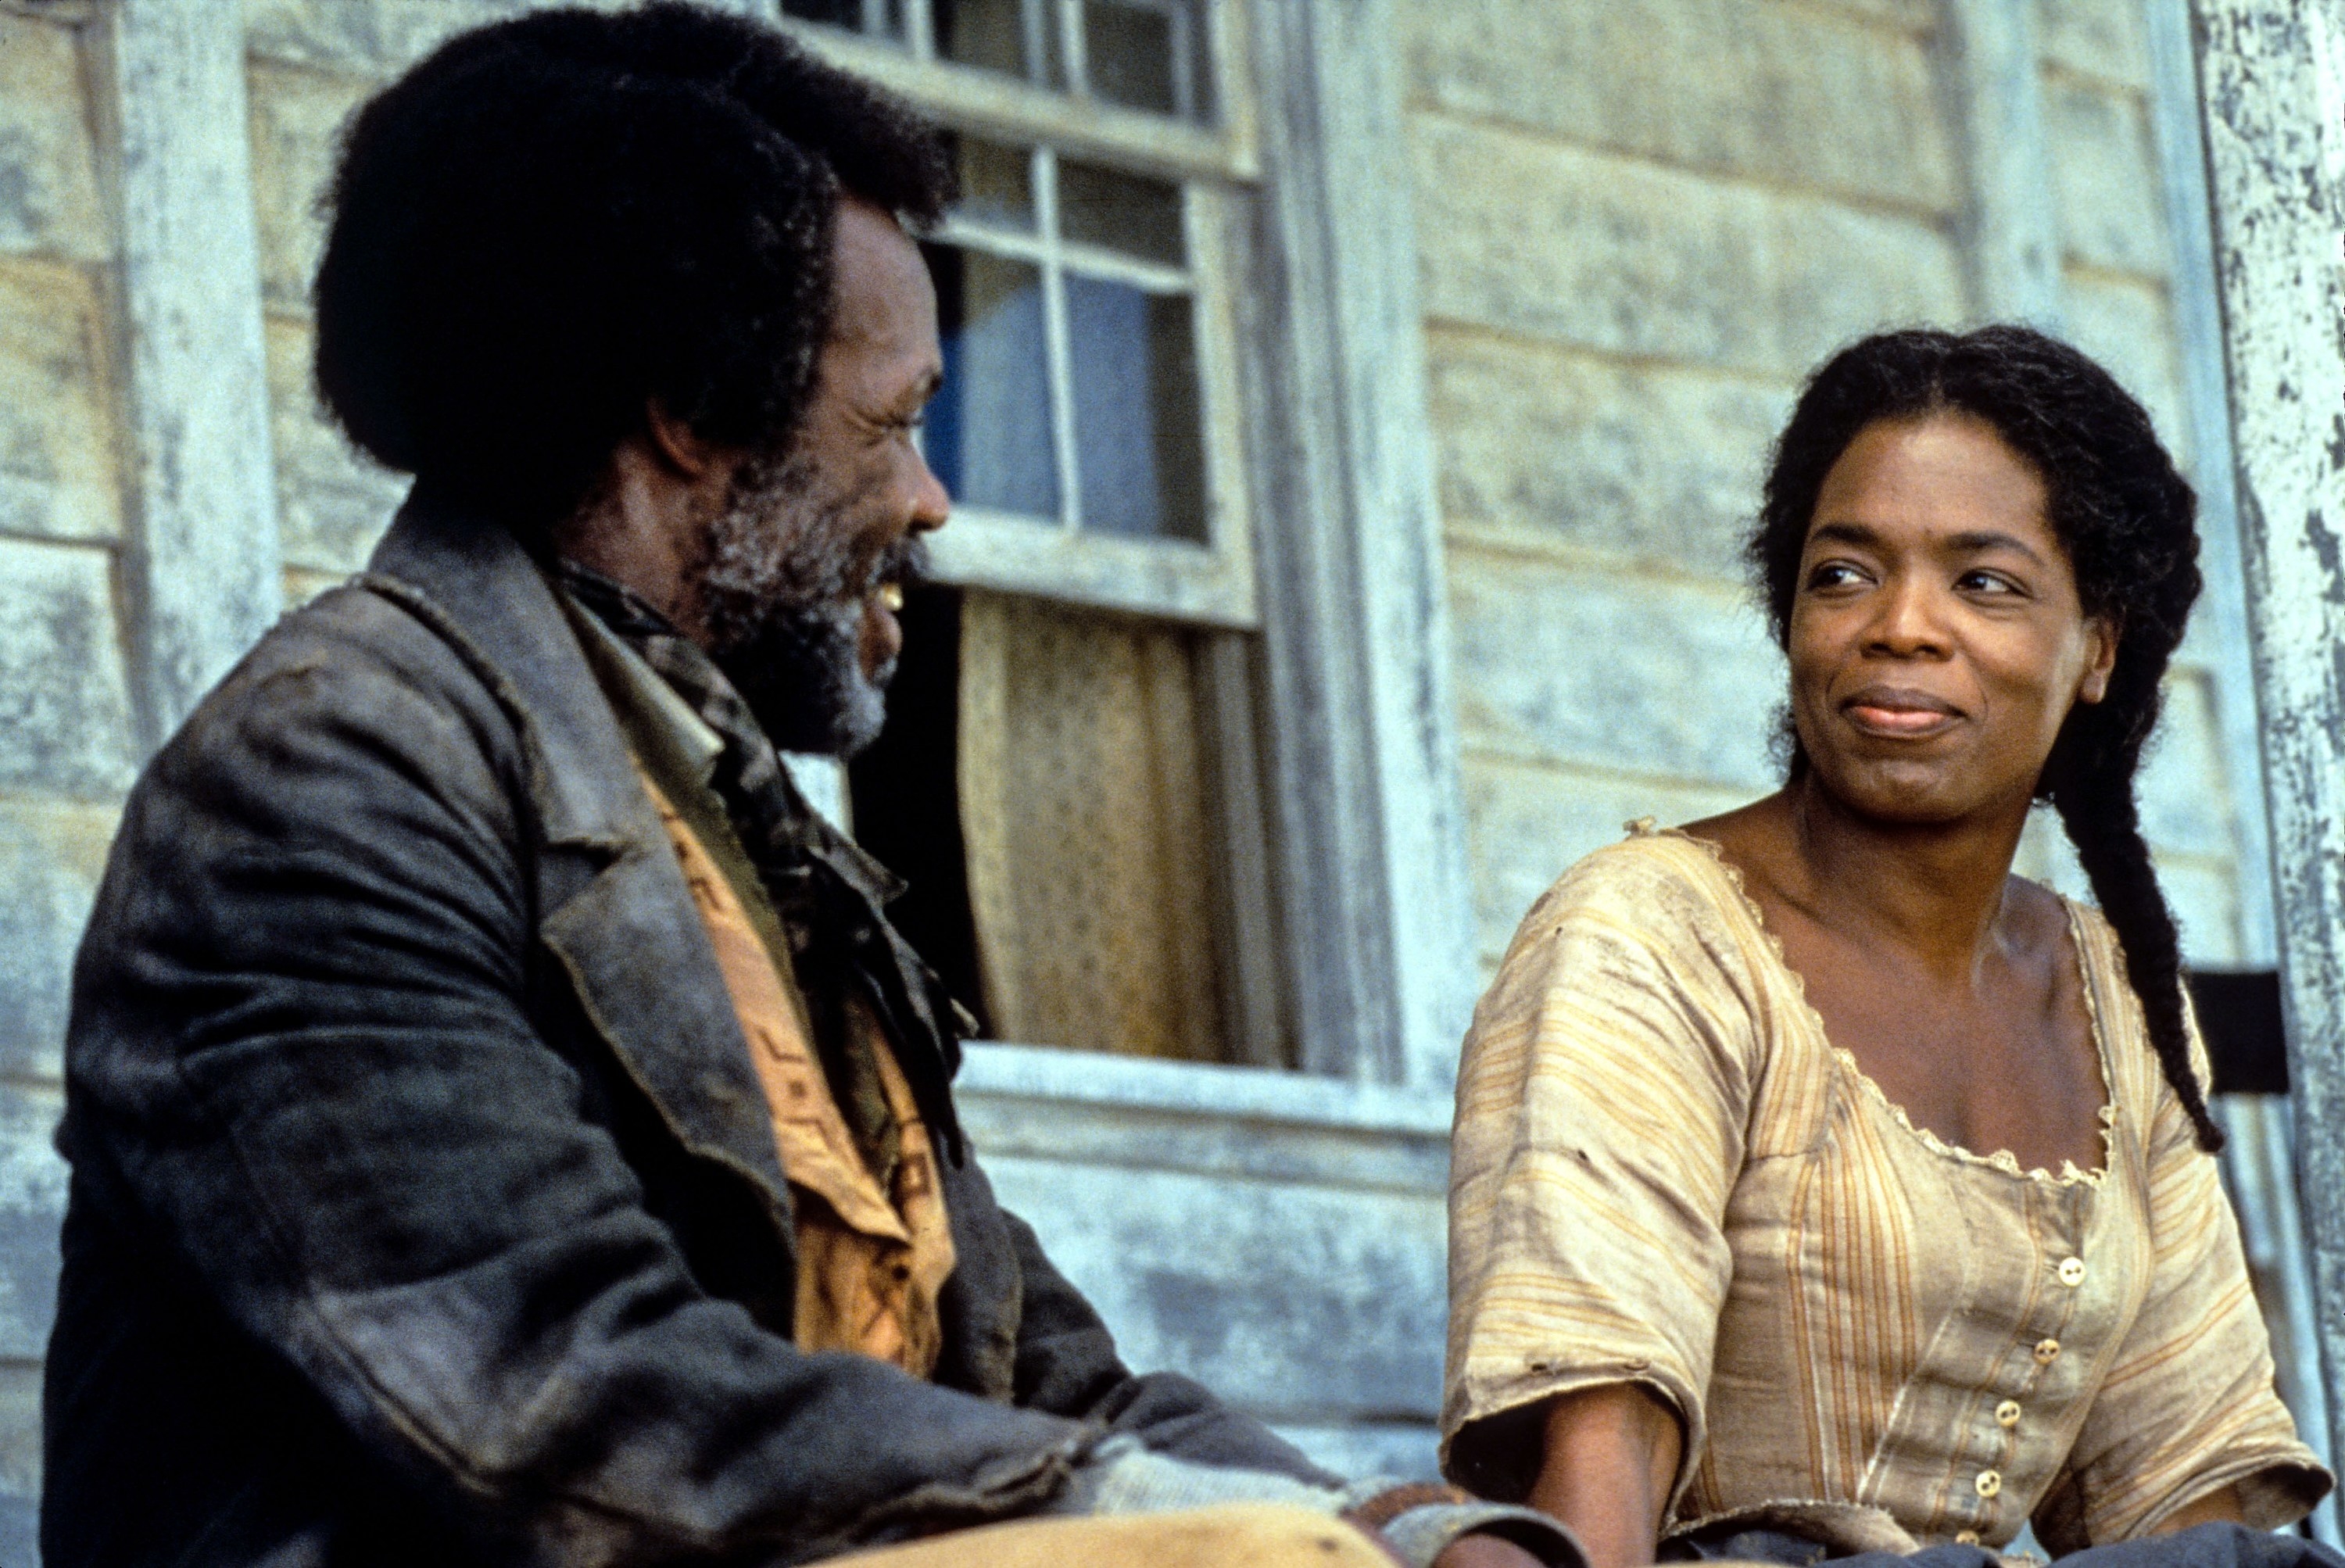 Danny Glover and Oprah Winfrey sit on a porch together